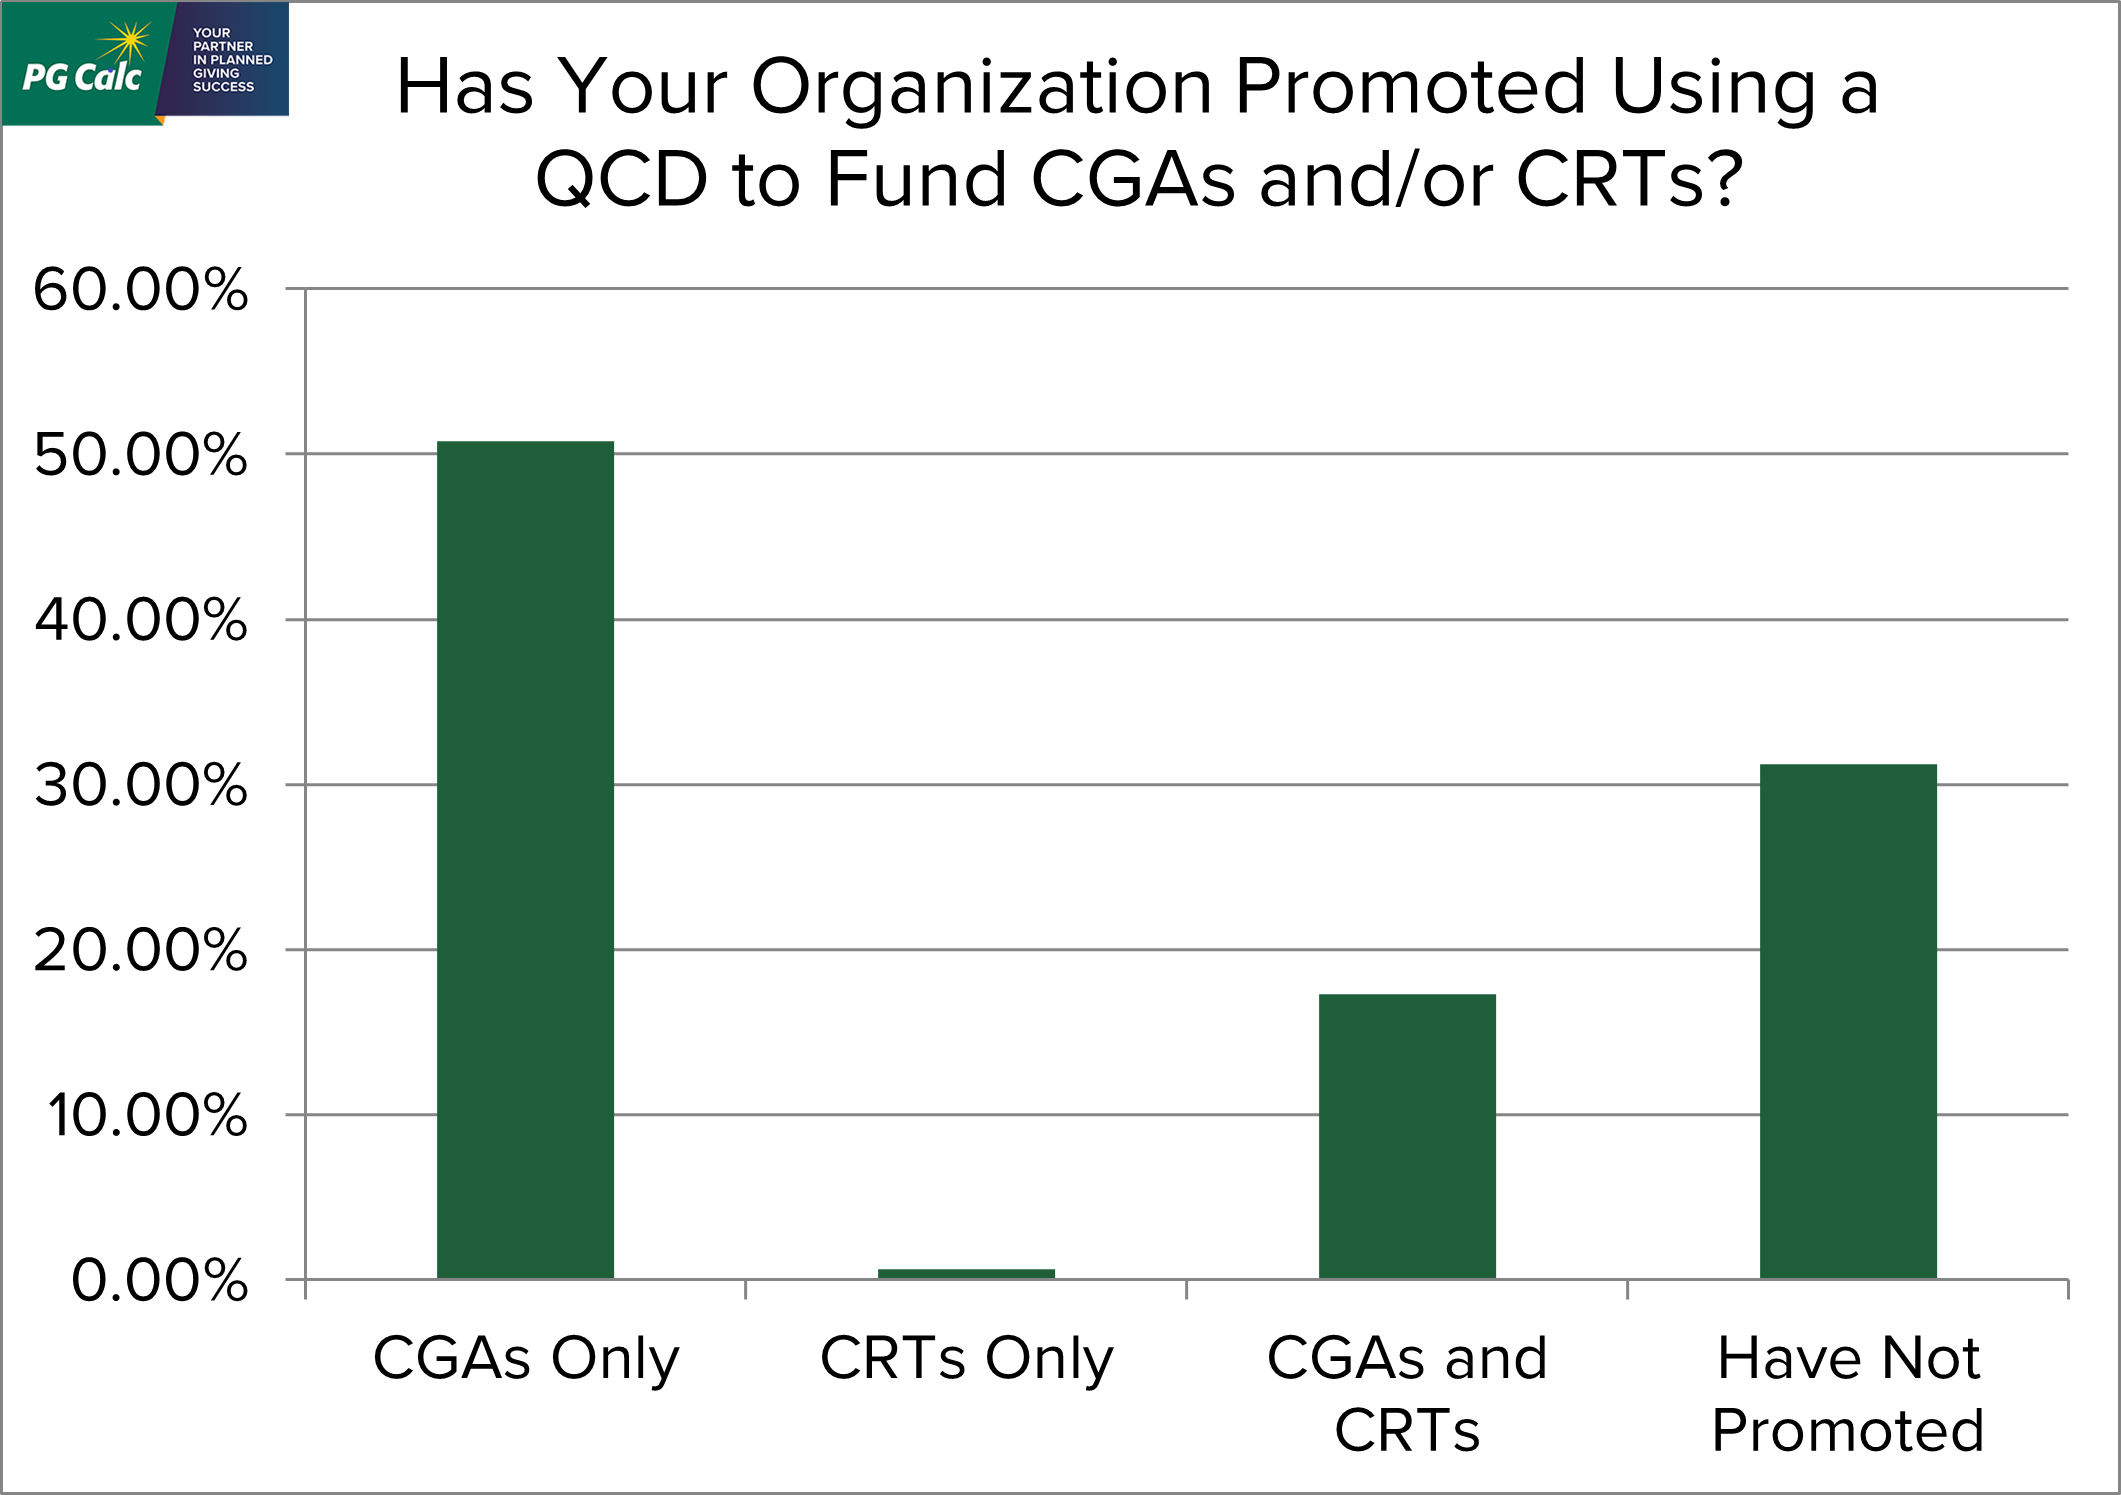 Graph: Has your organization promoted using a QCD to fund CGAs and/or CRTs? CGAs only = 50.8%, CRTs only = 0.7%, CGAs and CRTs = 17.3%, Have not promoted = 31.2%